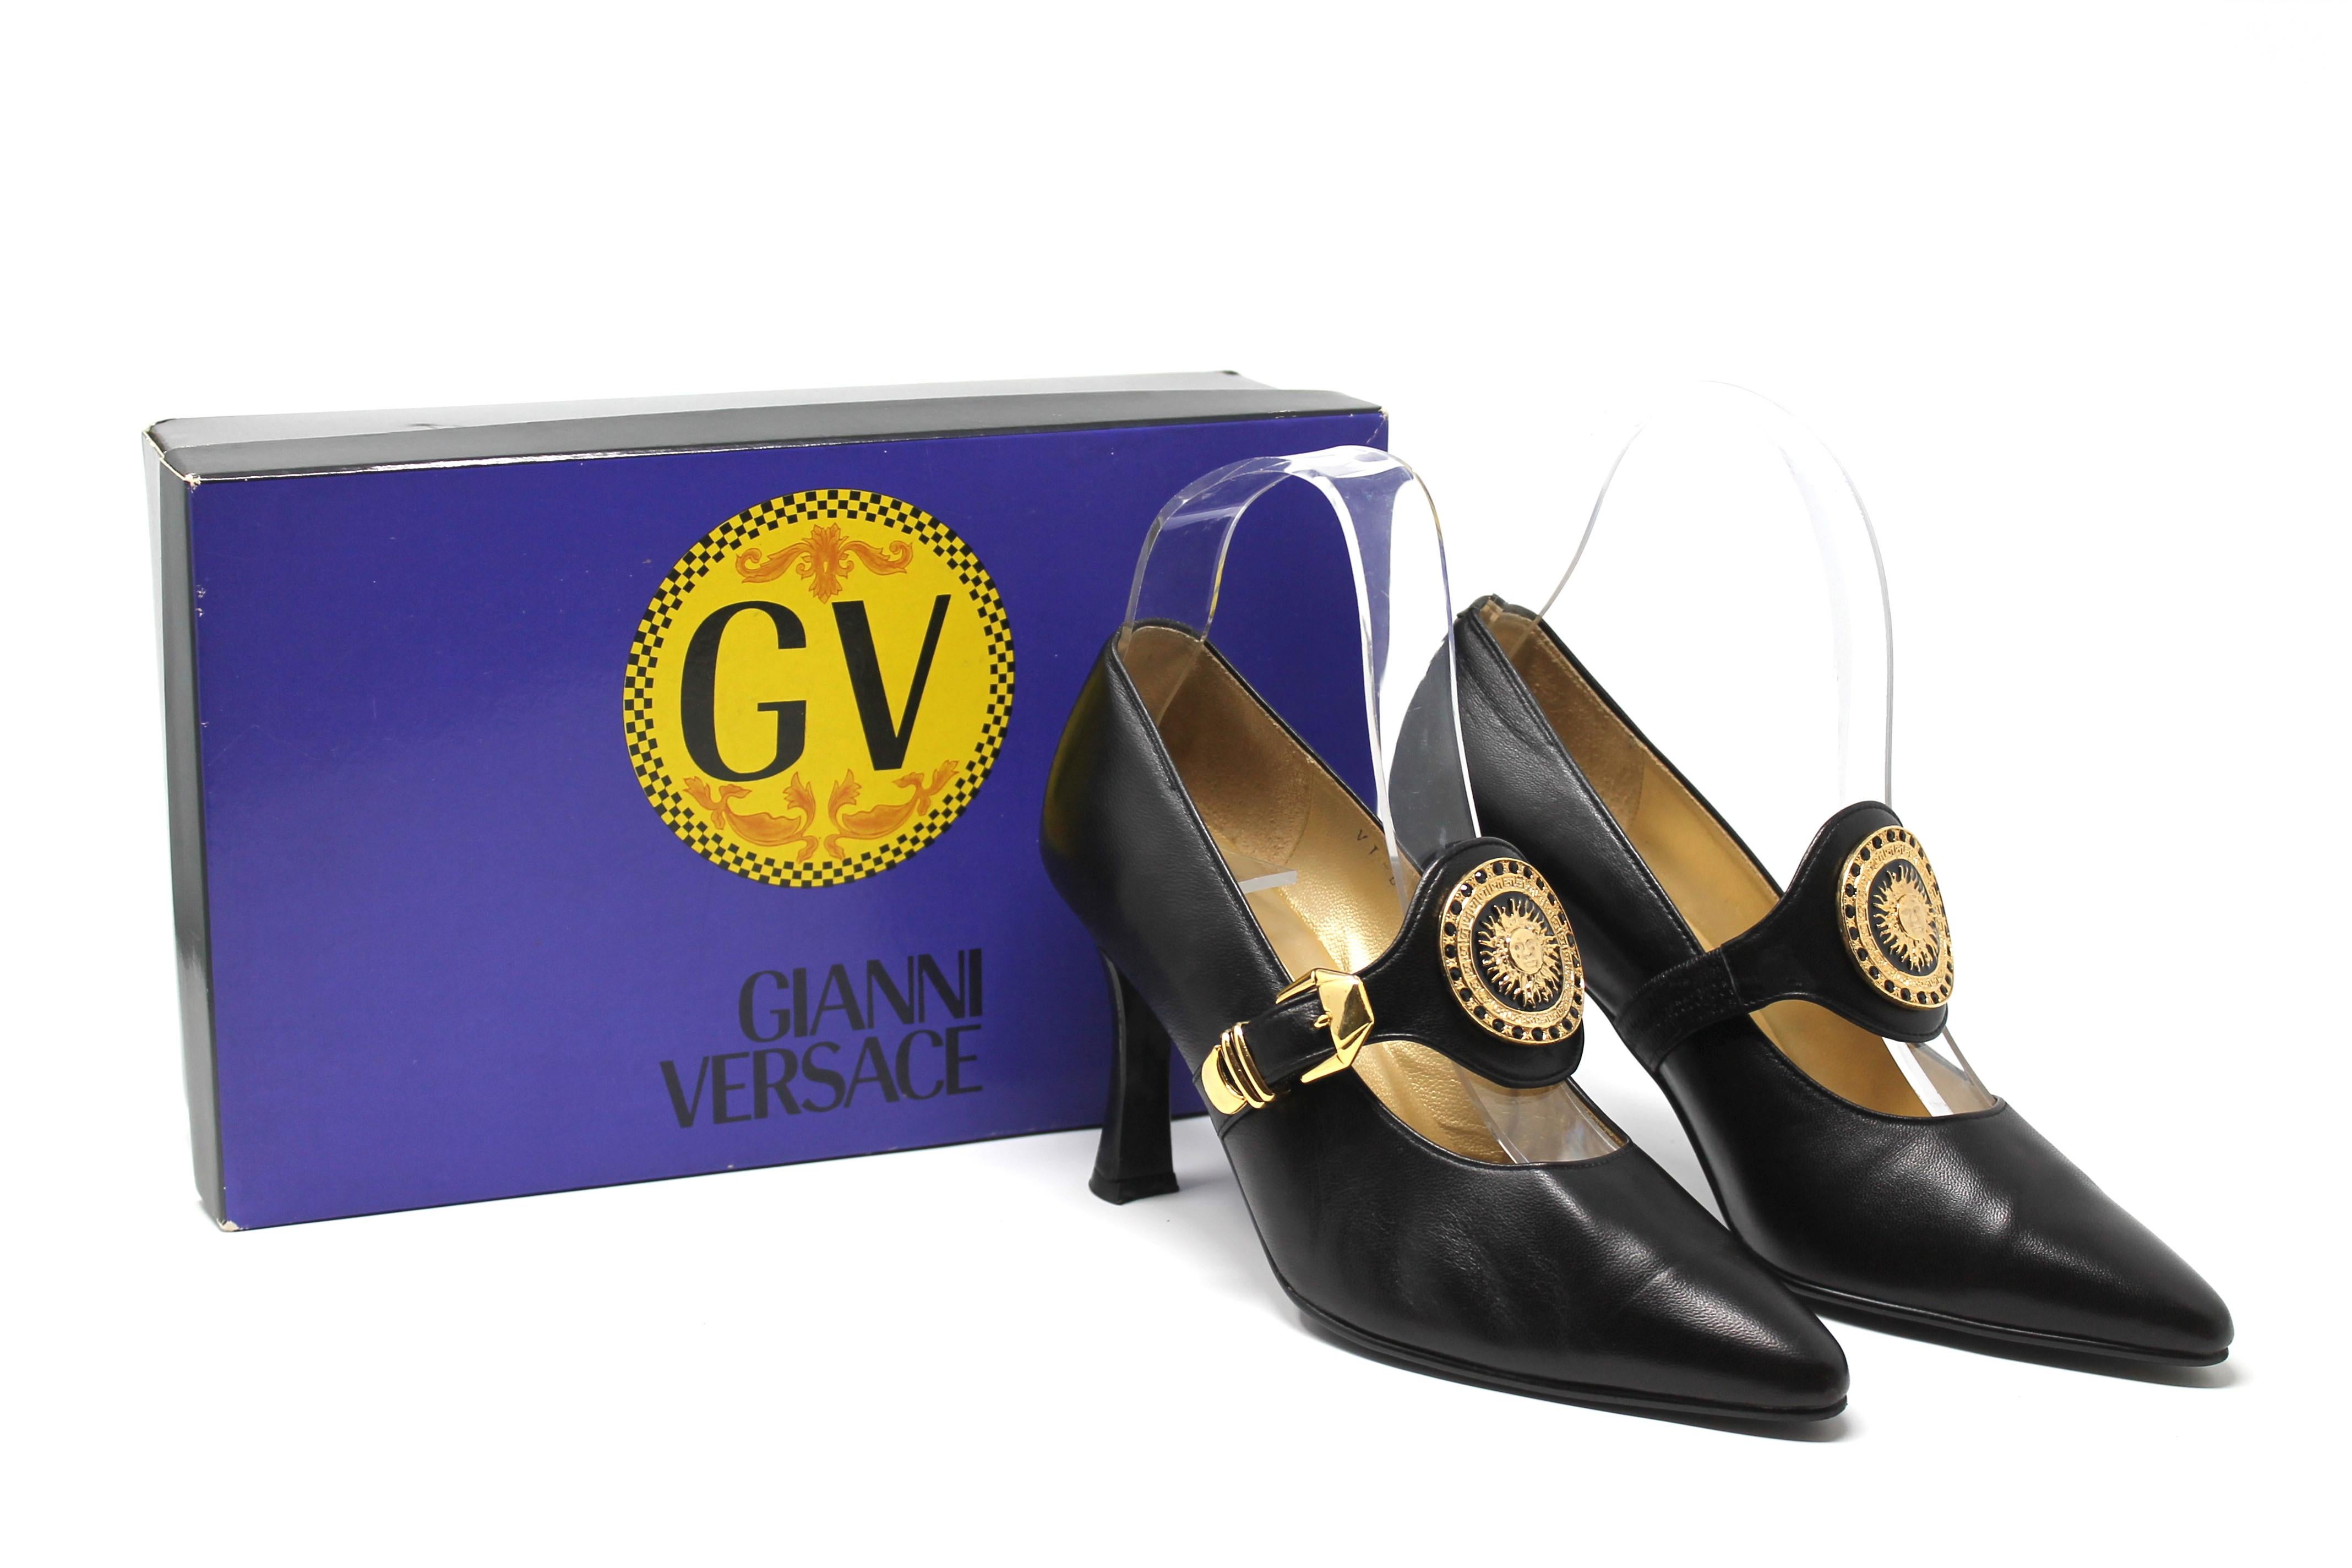 -Beautiful pair of Gianni Versace shoes in classic Mary Jane style
-Feature bold sun medallion and gold hardware accents 
-Shoes come in original box, worn once for a photo shoot 
-Made in Italy, 100% leather

-Size 35.5 Italian / US 5.5 
-Heel